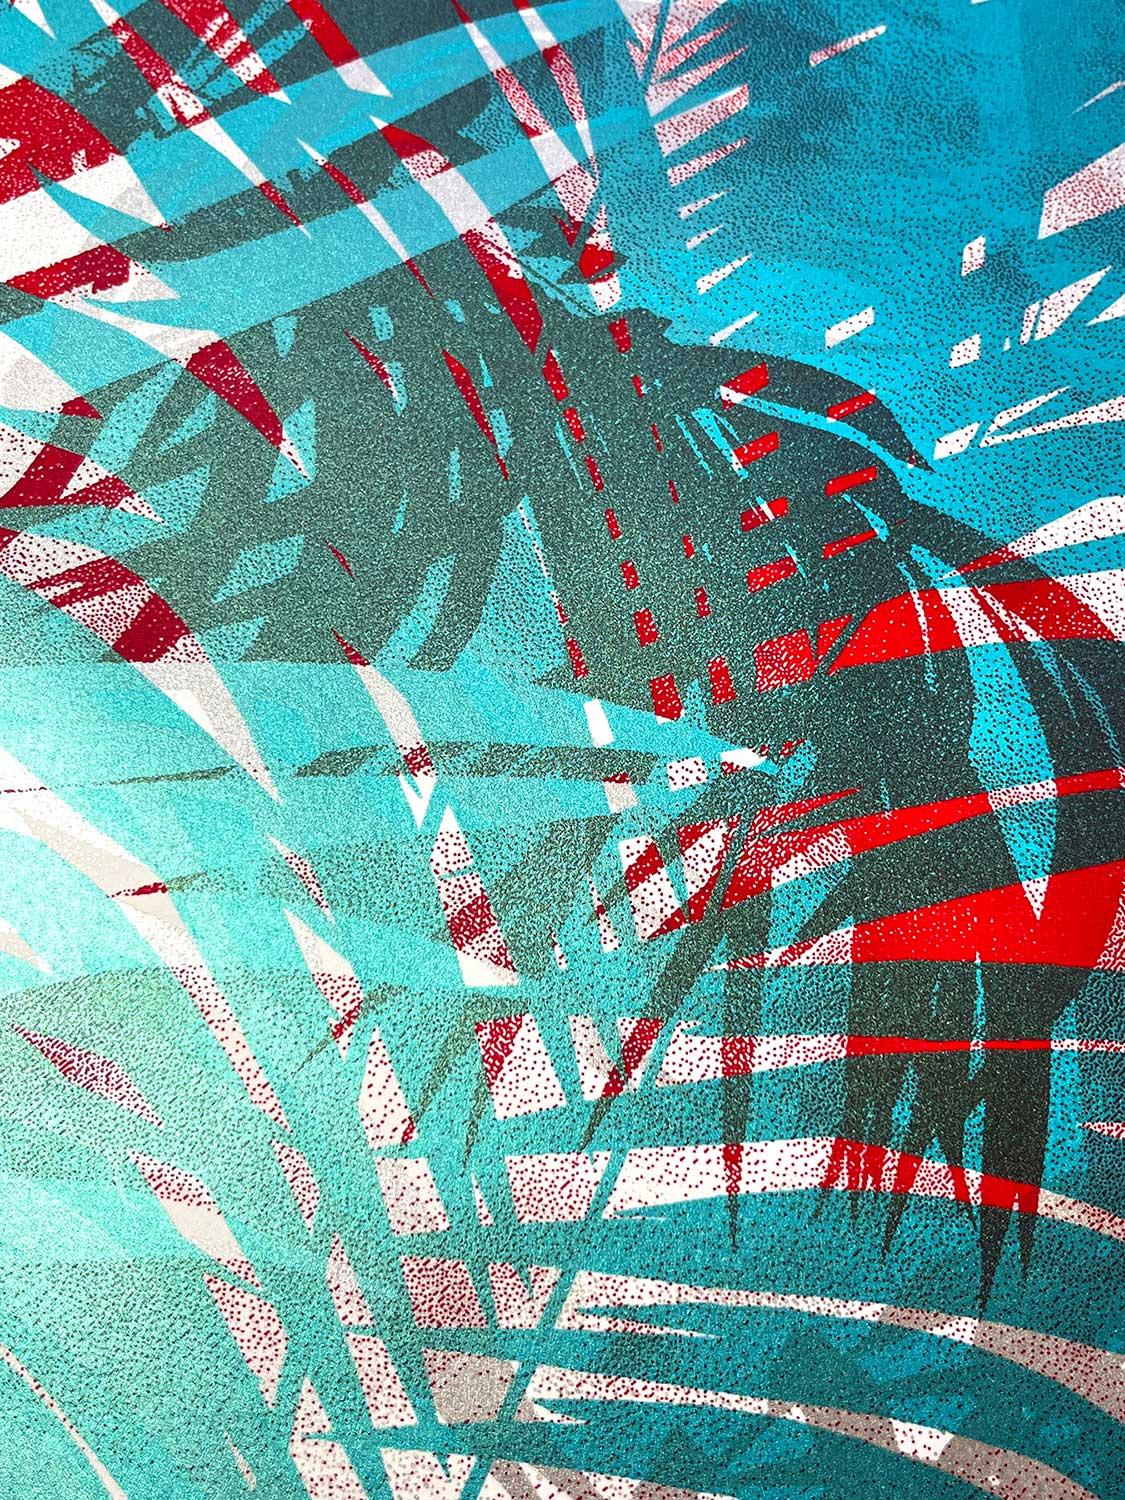 TROPIC PALM, Limited edition print, Tropical, Red, Blue, Tree, Nature  - Contemporary Print by Chris Keegan